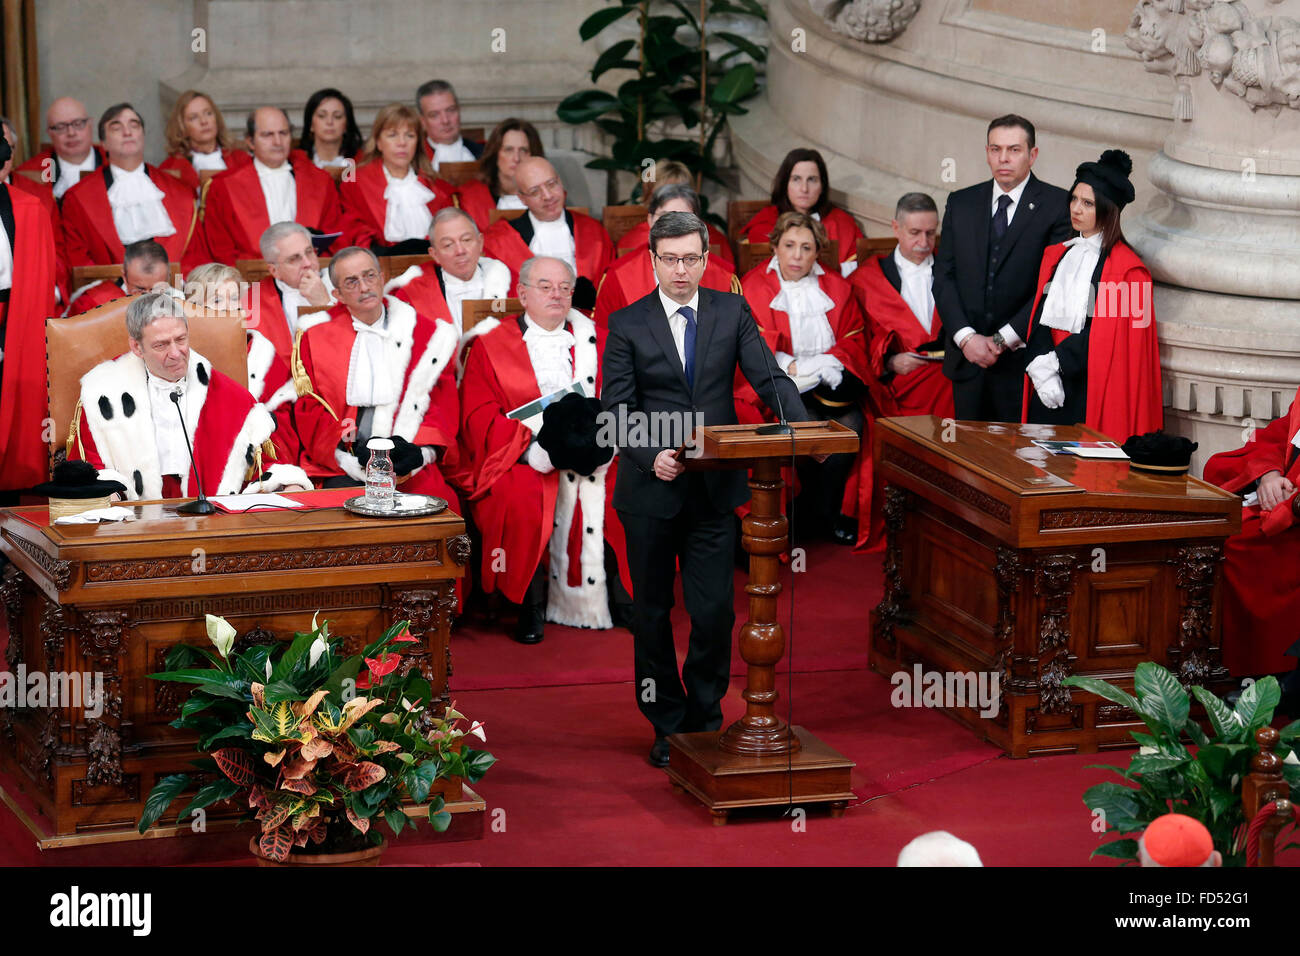 Rome, Italy. 28th Jan, 2016. Andrea Orlando Minister of Justice Rome 28th January 2016 Justice Palace. Opening of the judicial year at the Court of Cassation. Credit:  Samantha Zucchi/Insidefoto/Alamy Live News Stock Photo